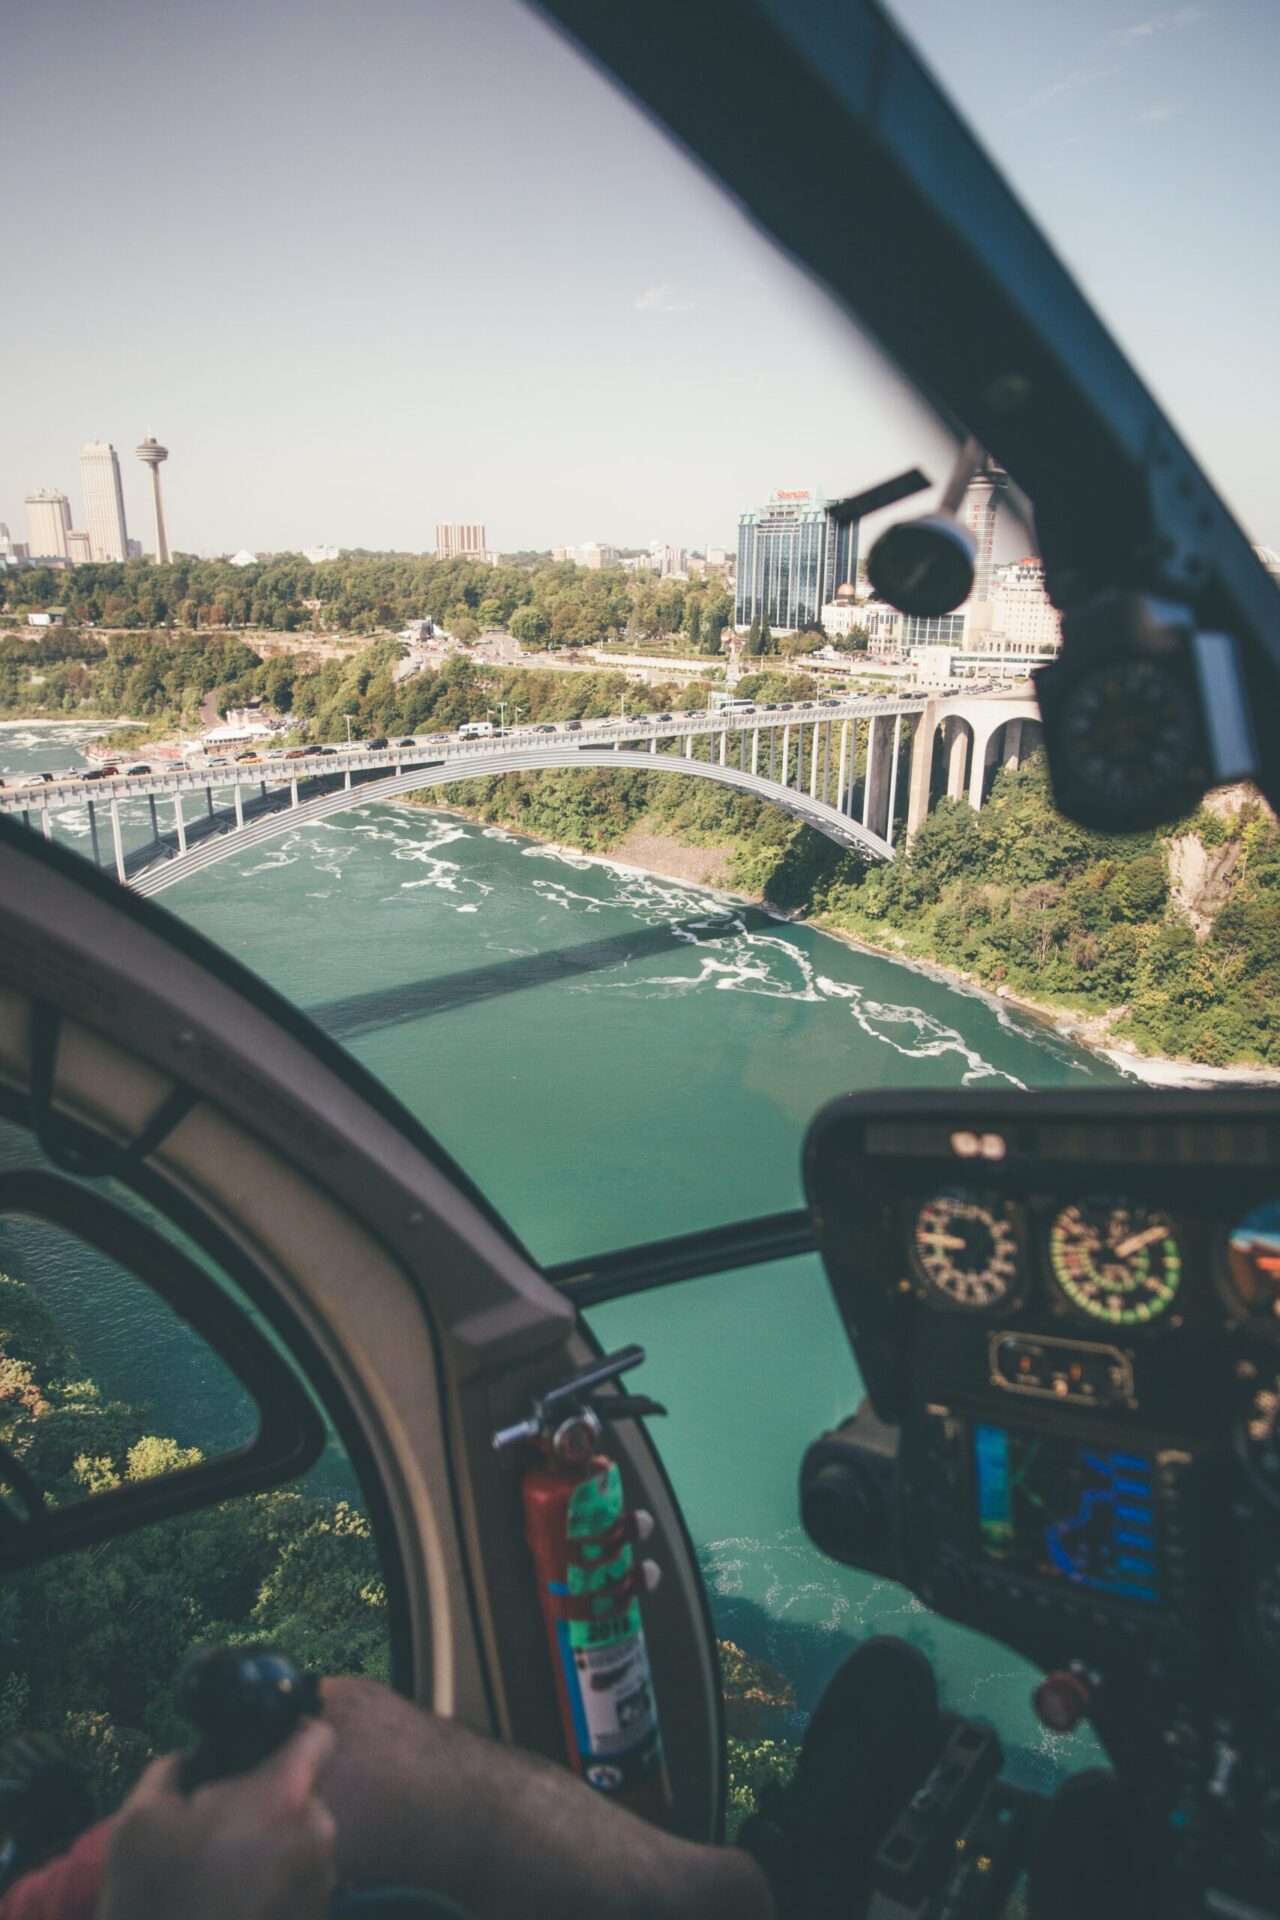 Helicopter Tours: A Bird's Eye View in Comfort